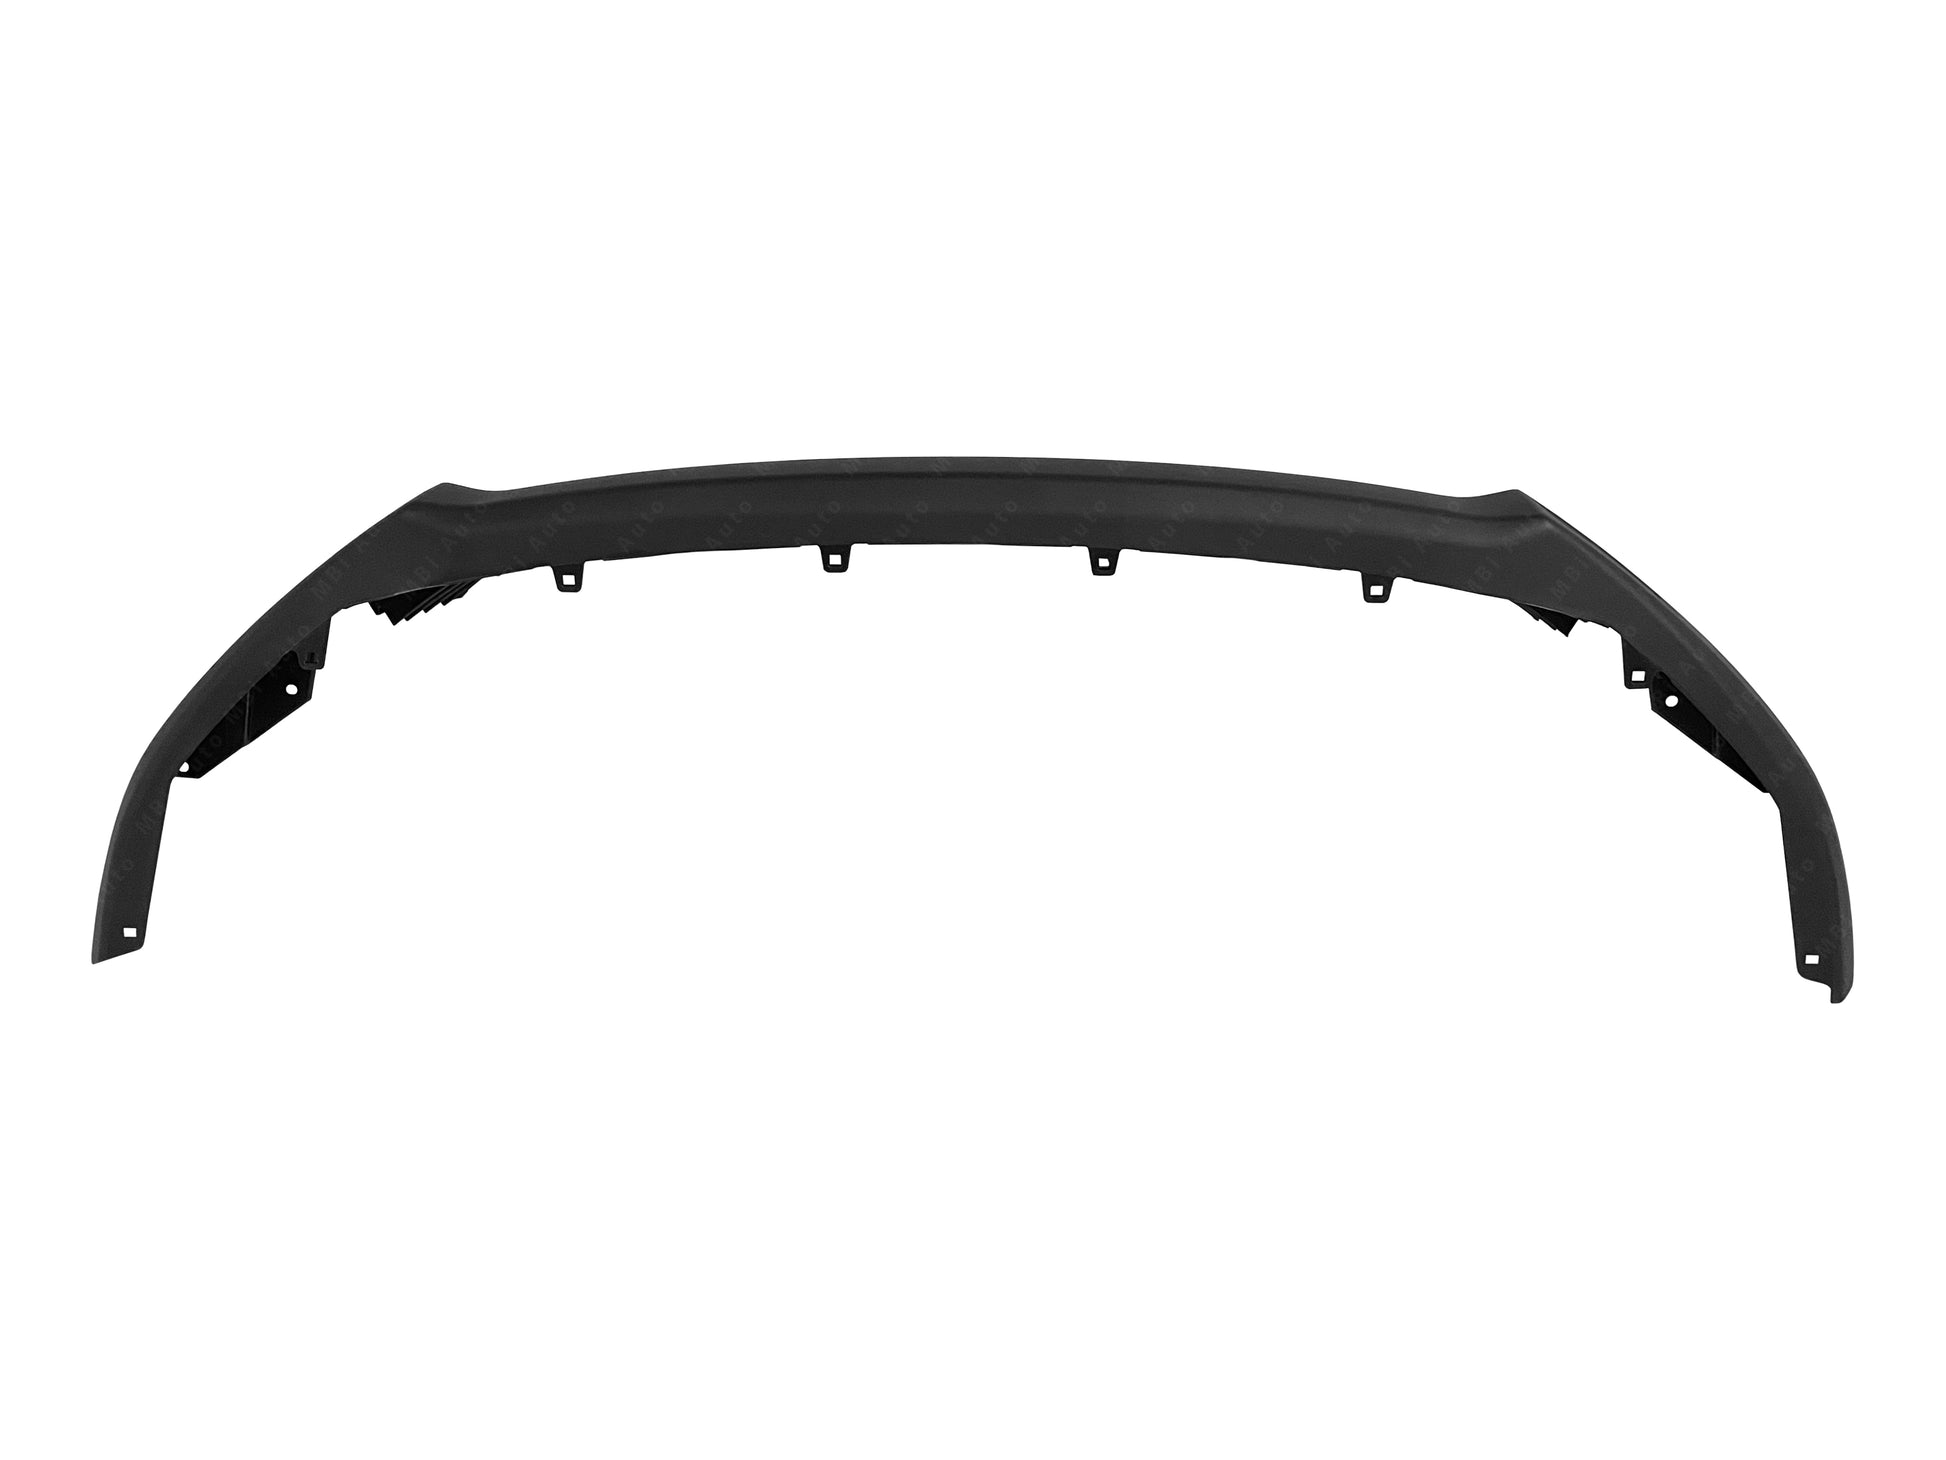 Toyota Highlander 2017 - 2019 Front Textured Lower Valance 17 - 19 TO1015111 Bumper King